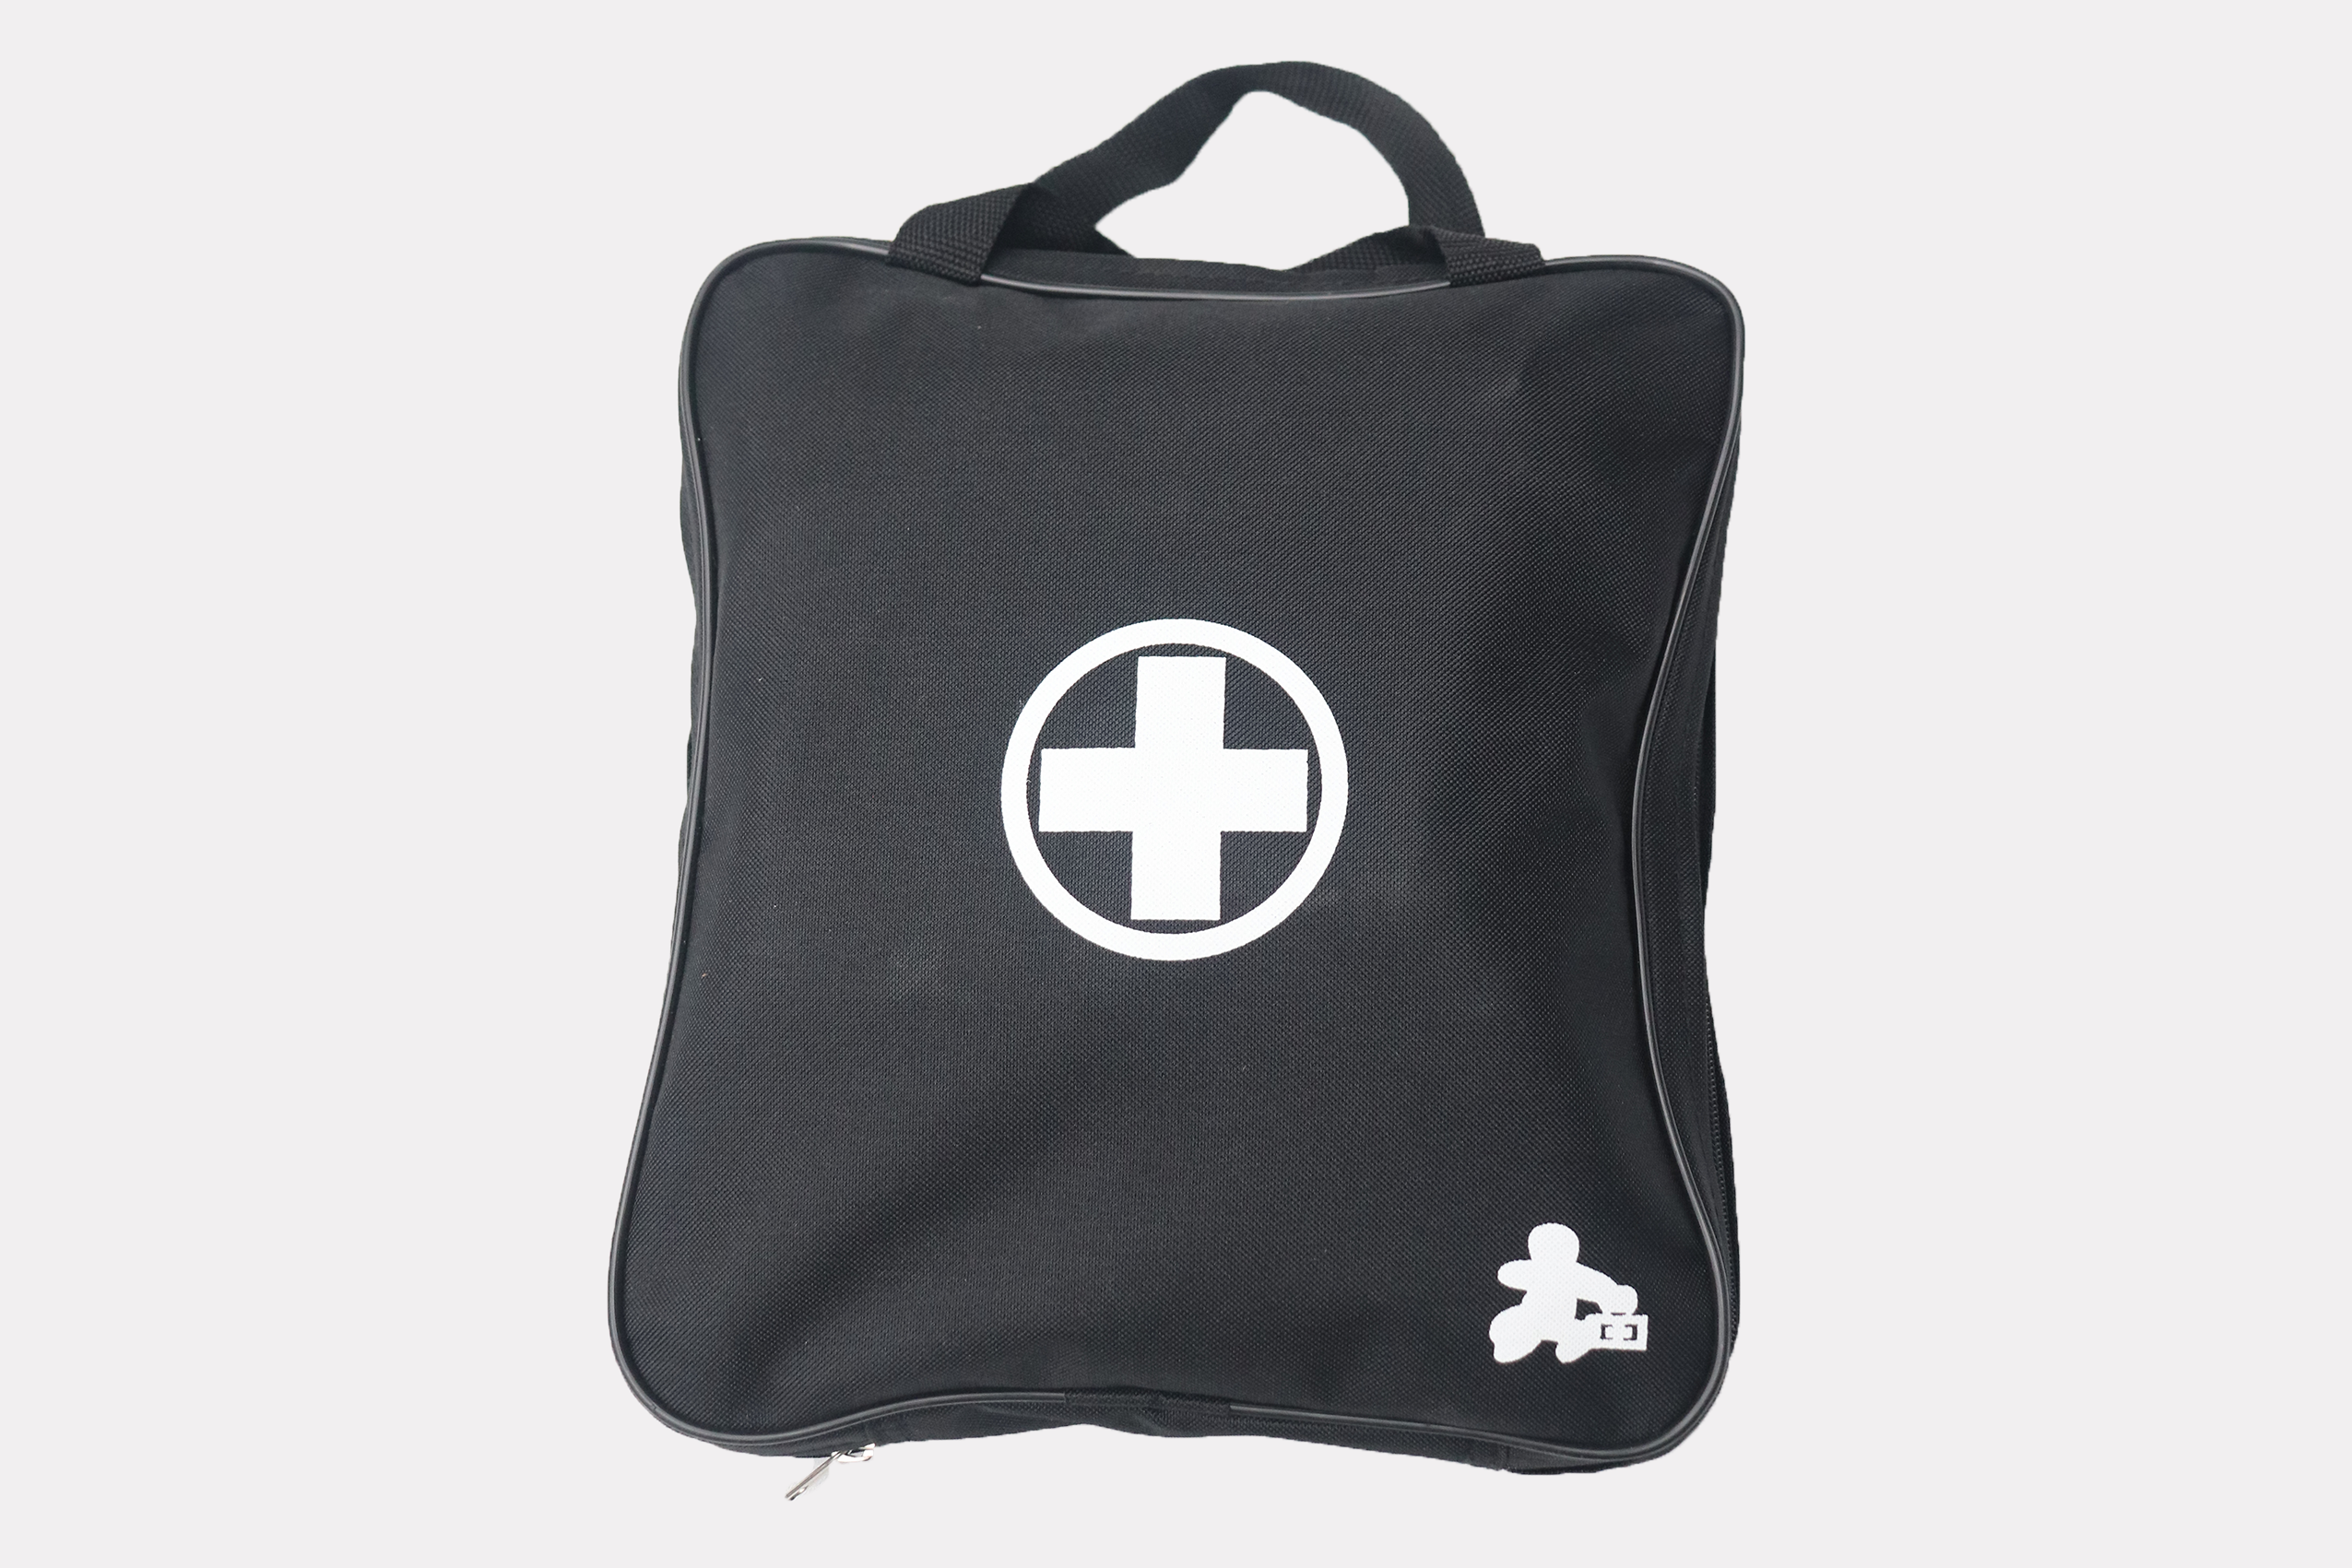 Motorist First Aid Kit Bag only